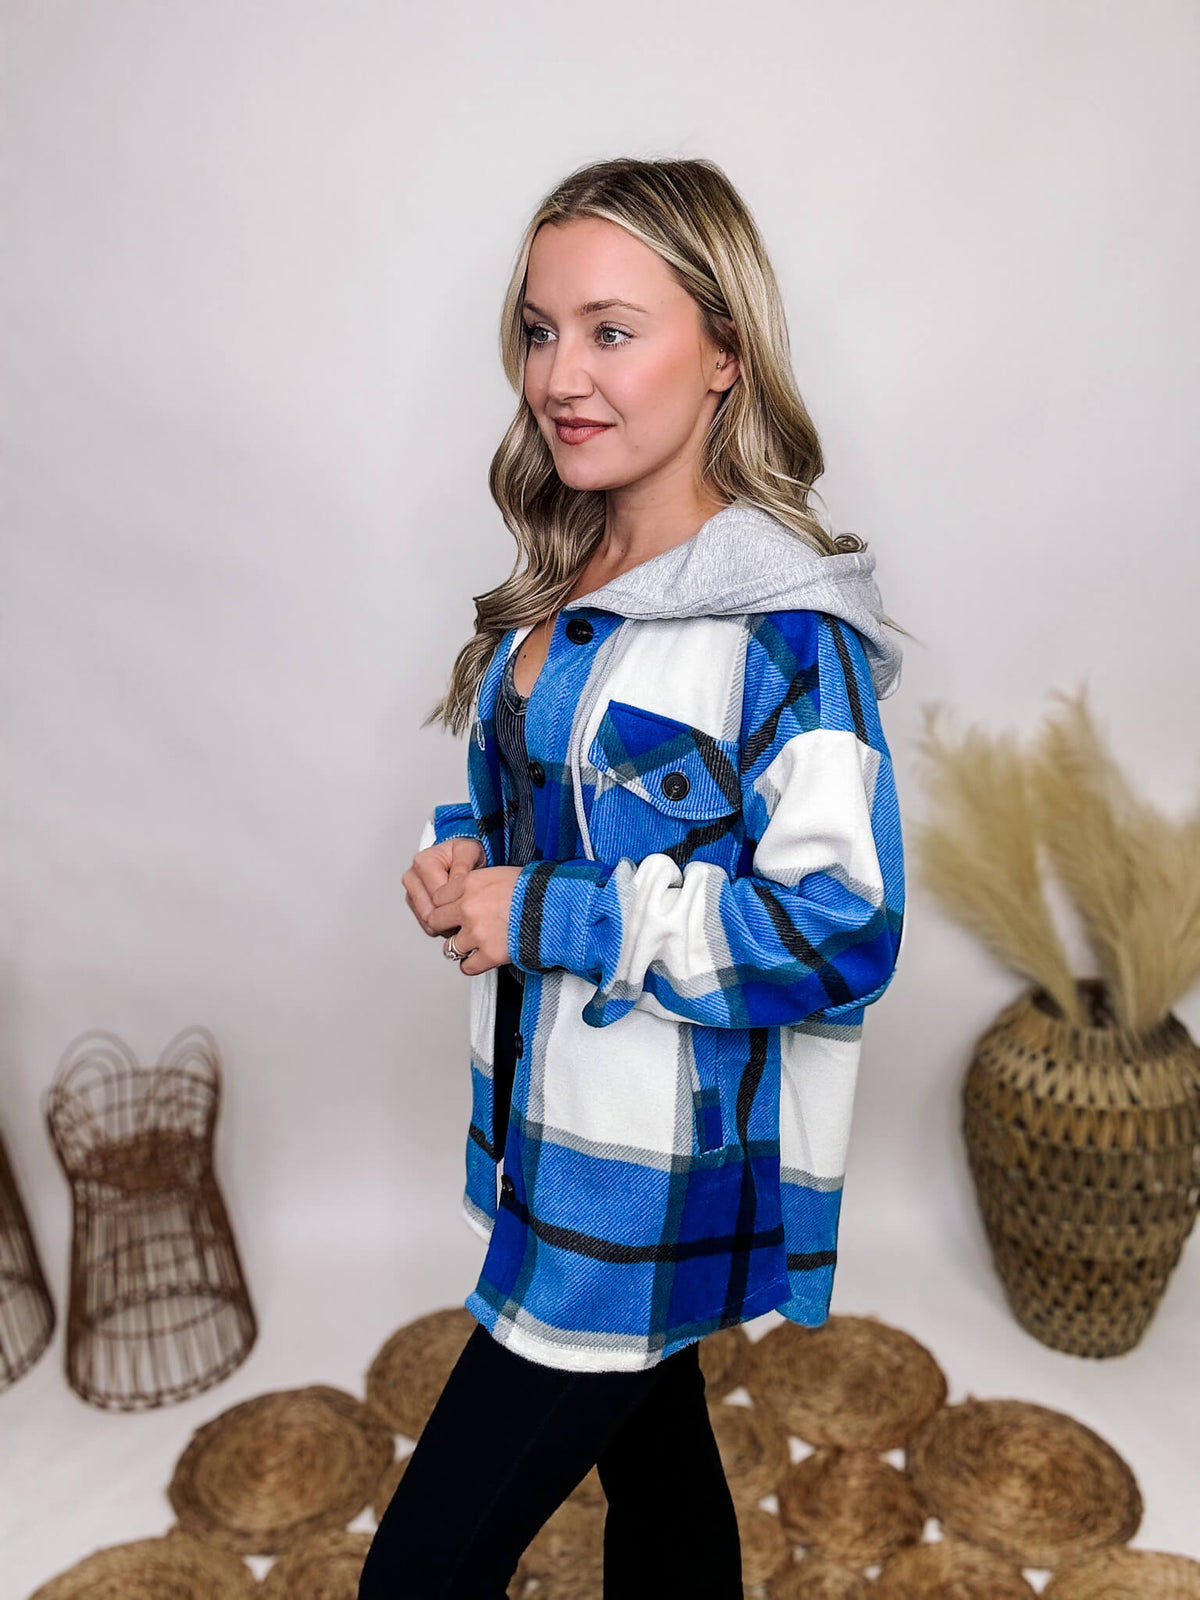 Zenana Ocean Blue Plaid Super Soft Fleece Oversized Shacket Side Pockets Chest Pockets Button Up Front Grey Hood with Drawstring Oversized Fit 100% Polyester